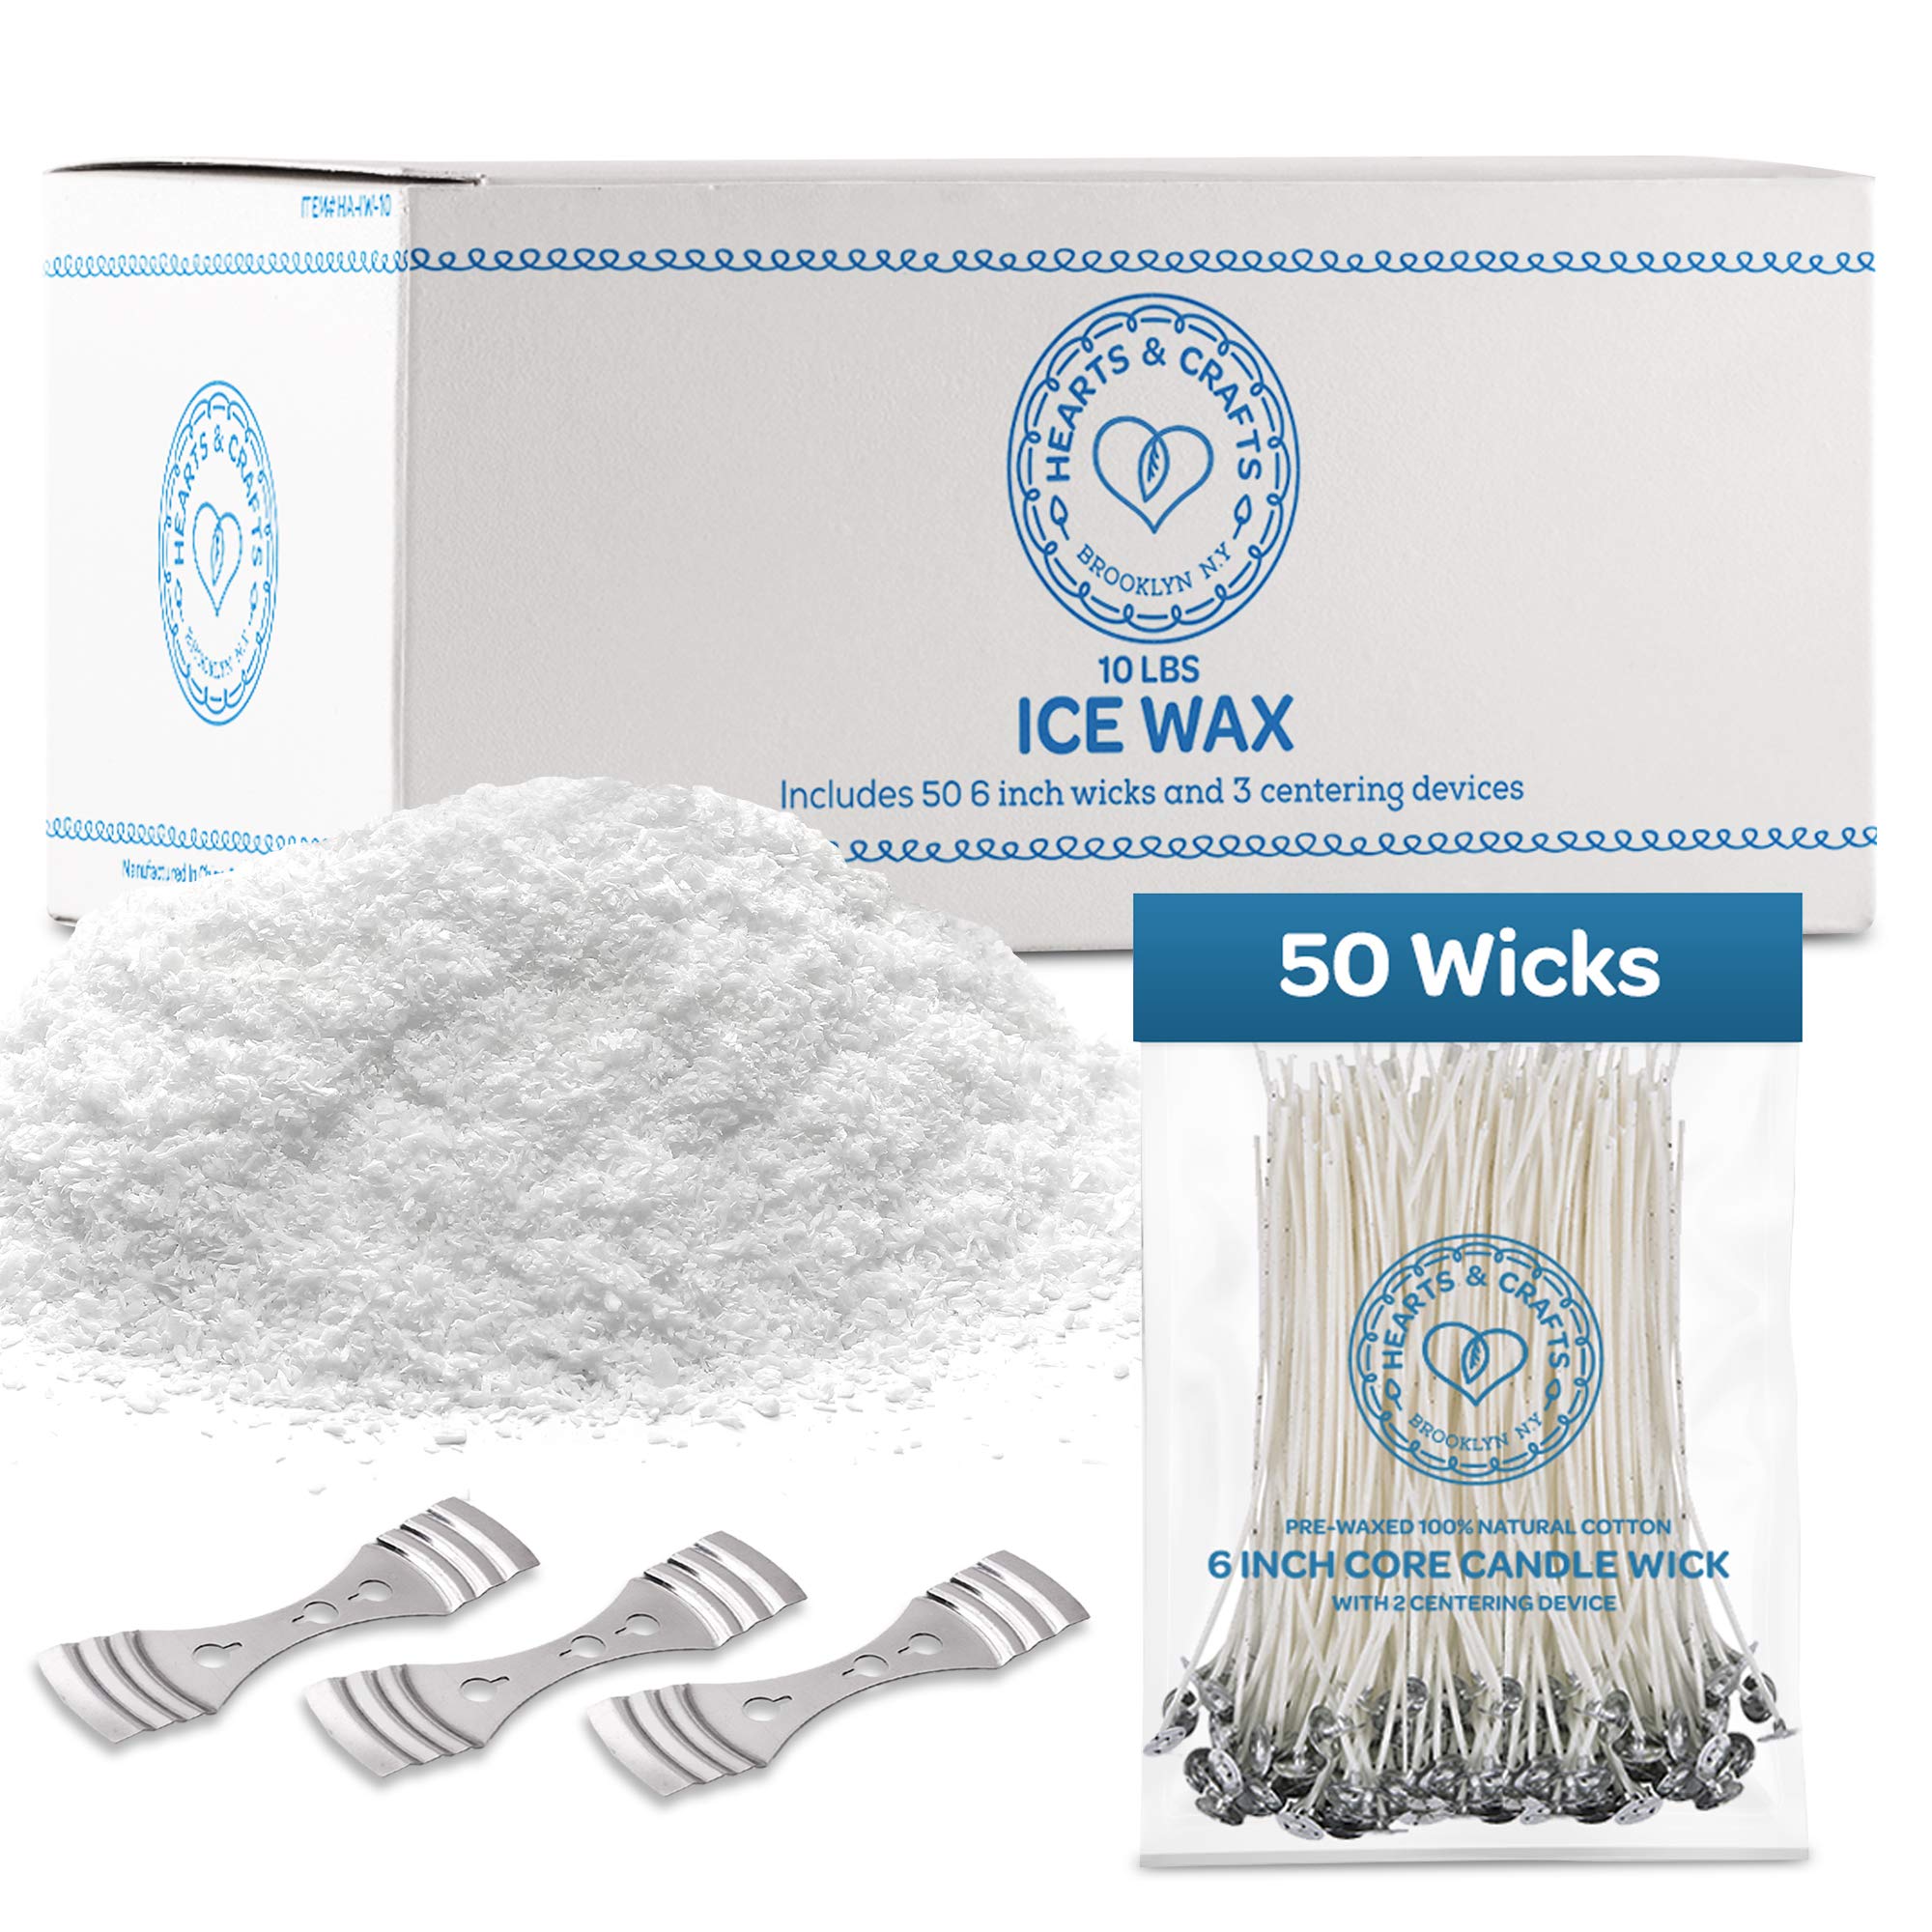 Hearts & Crafts Feathering Palm Candle Wax and Wicks for DIY Candle Making, All-Natural & RSPO Certified - 10lb Bag with 50ct 6” Pre-Waxed Candle Wicks, 3 Centering Device  - Like New